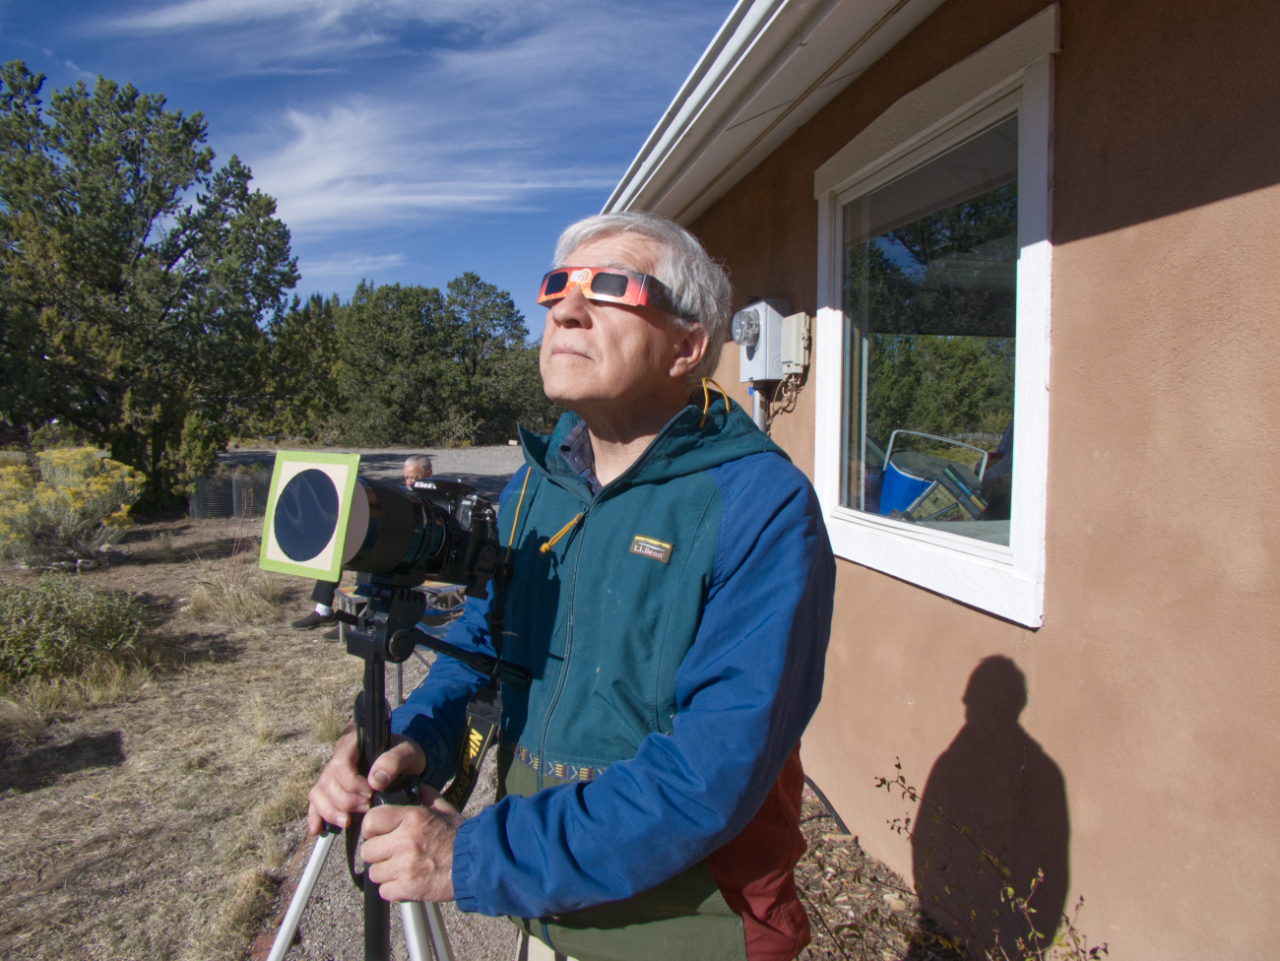 Dennis photographing the eclipse